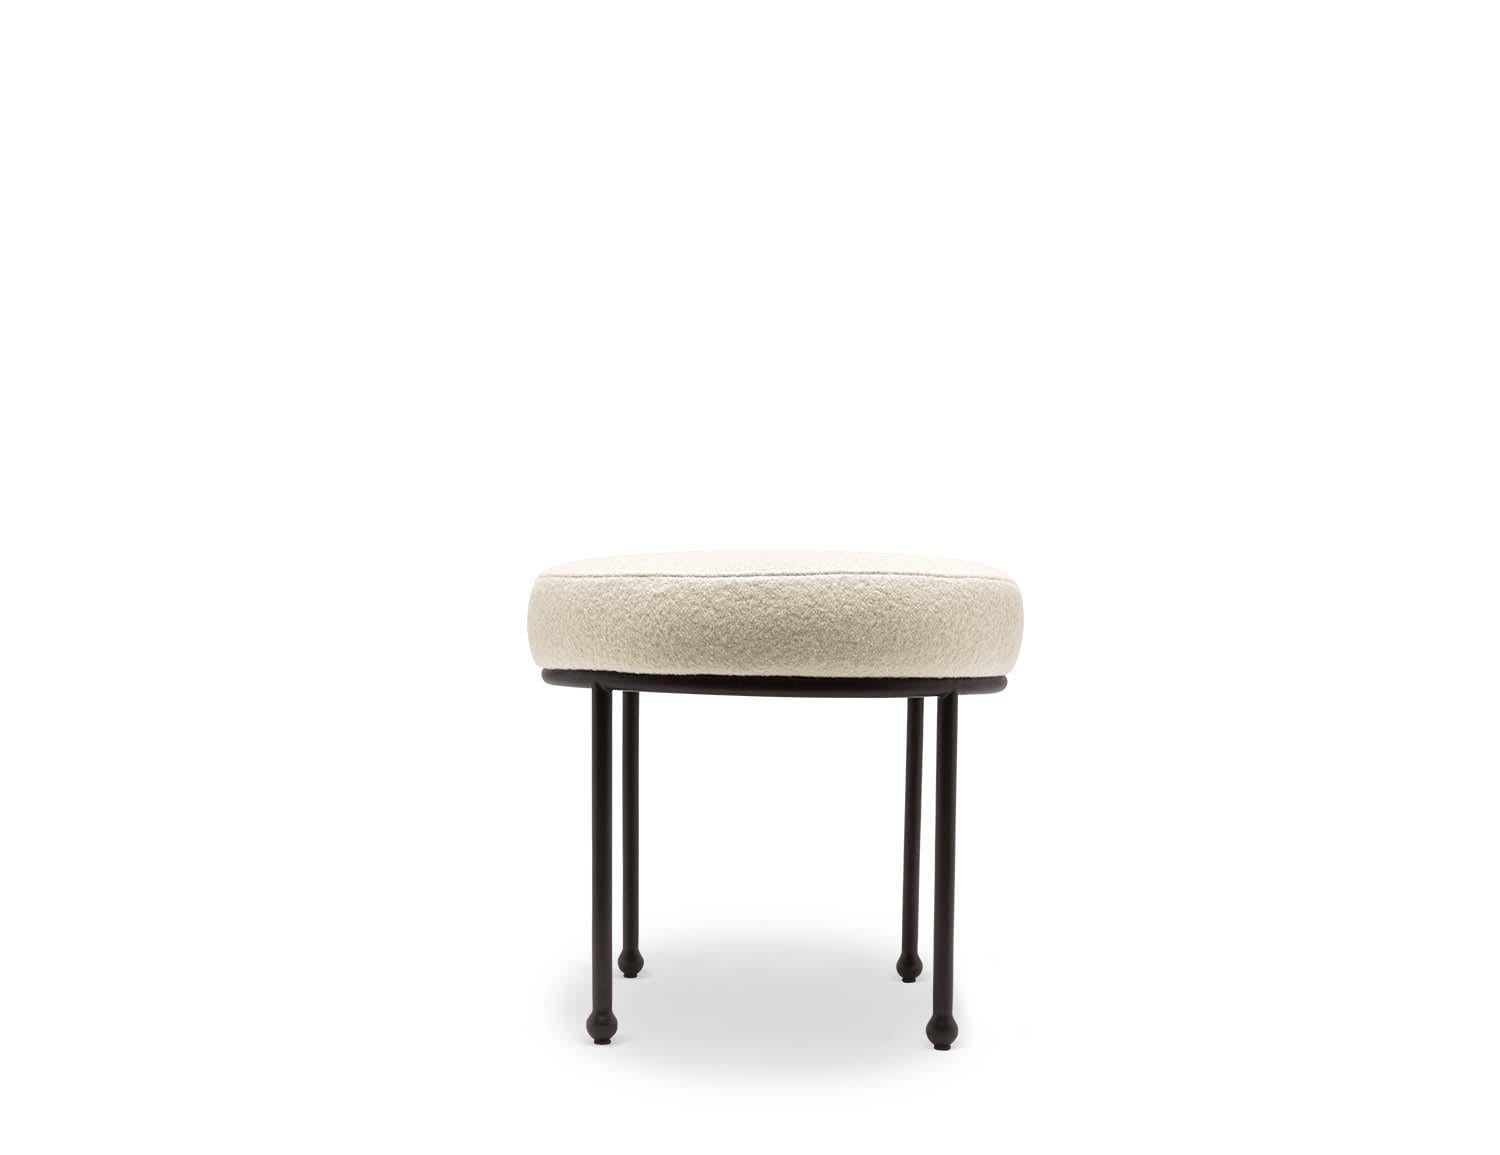 The Petite Orsini Ottoman features a minimal metal base with decorative ball feet and an upholstered seat. 

The Lawson-Fenning Collection is designed and handmade in Los Angeles, California.